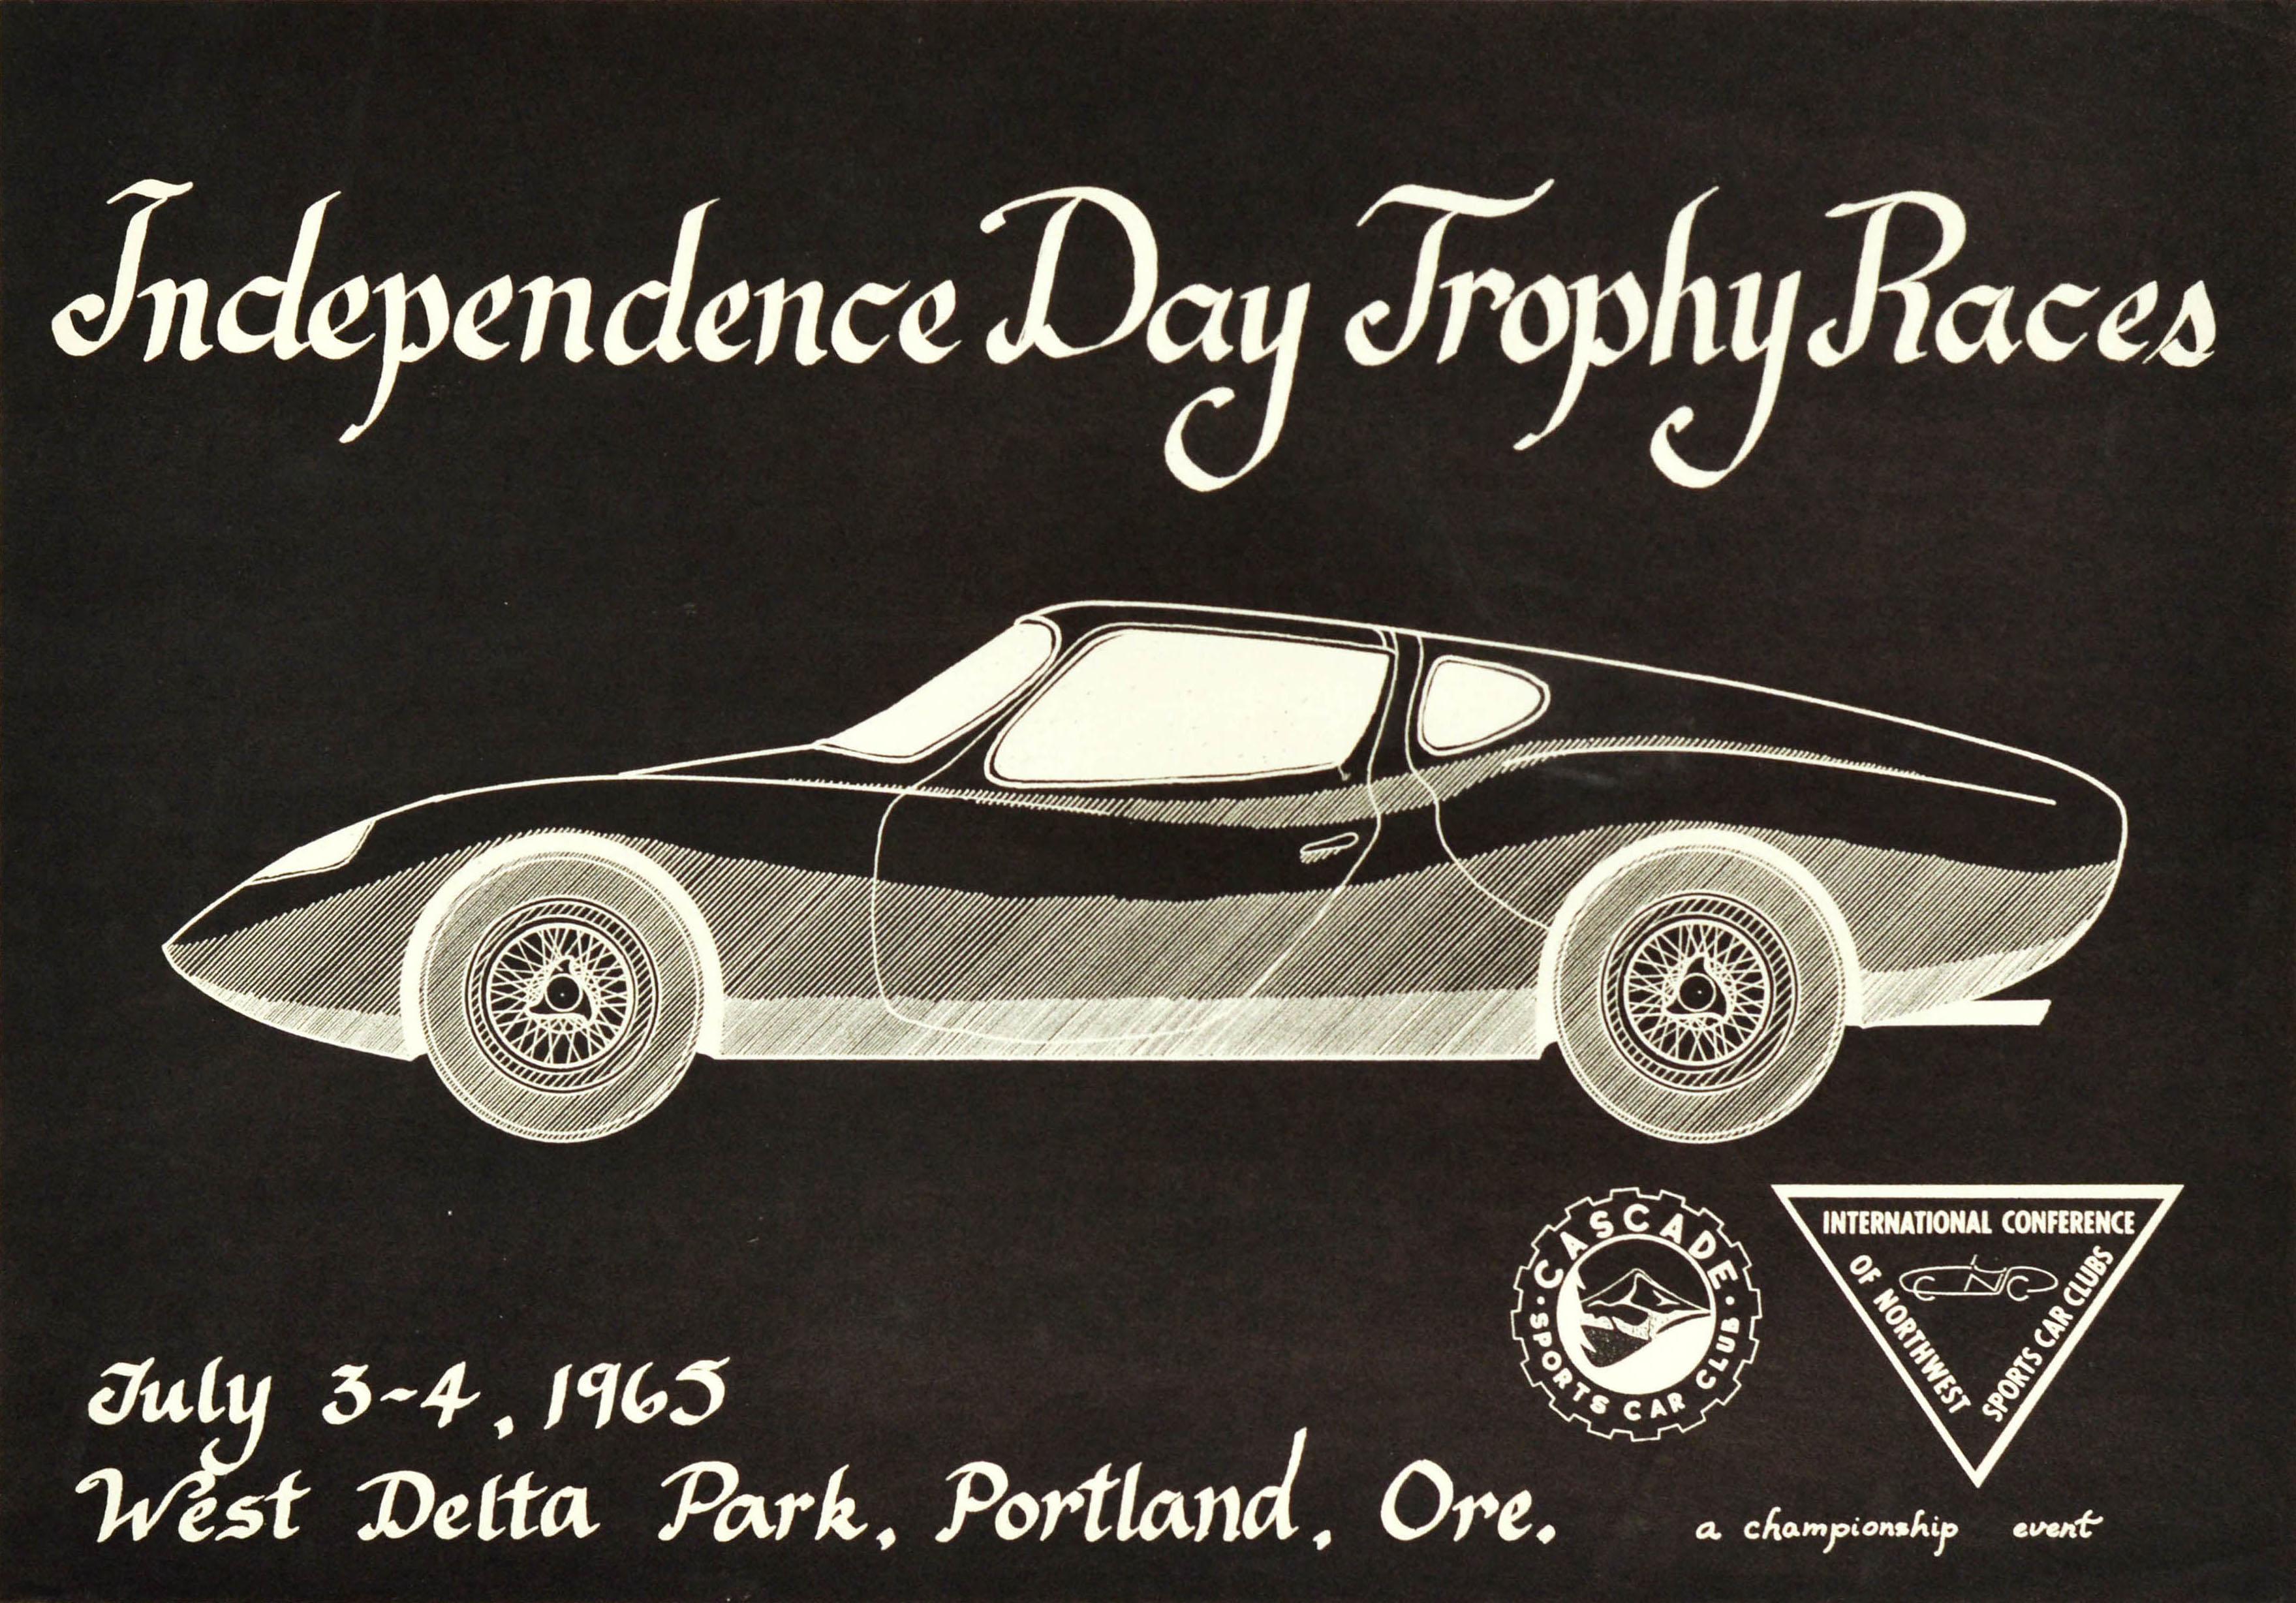 Unknown Print - Original Vintage Racing Poster Independence Day Trophy Races Sports Car Club Art